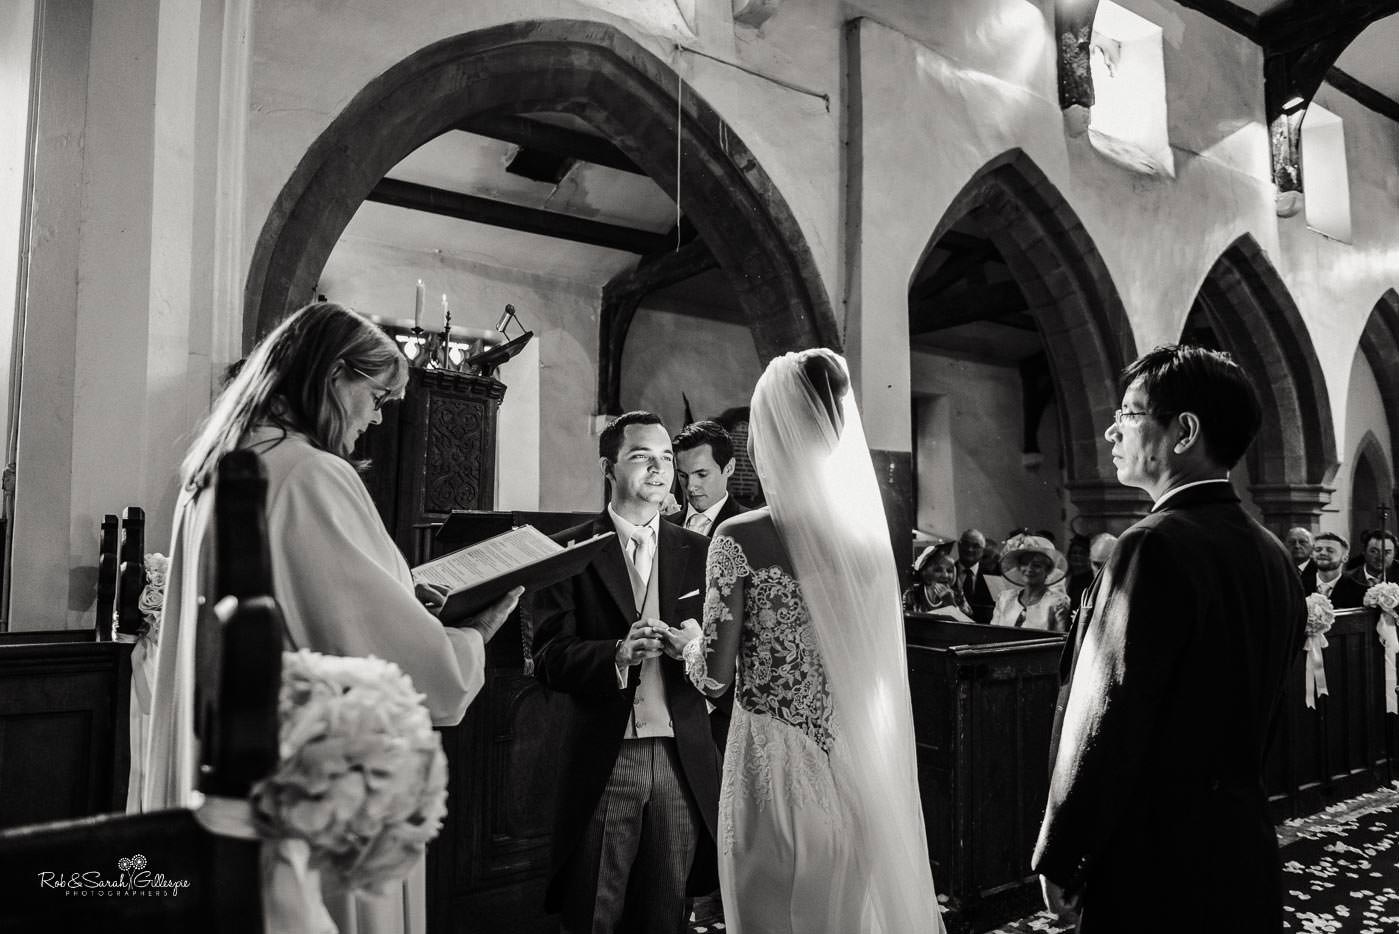 Wedding ceremony at St Peter's church Bourton-on-Dunsmore